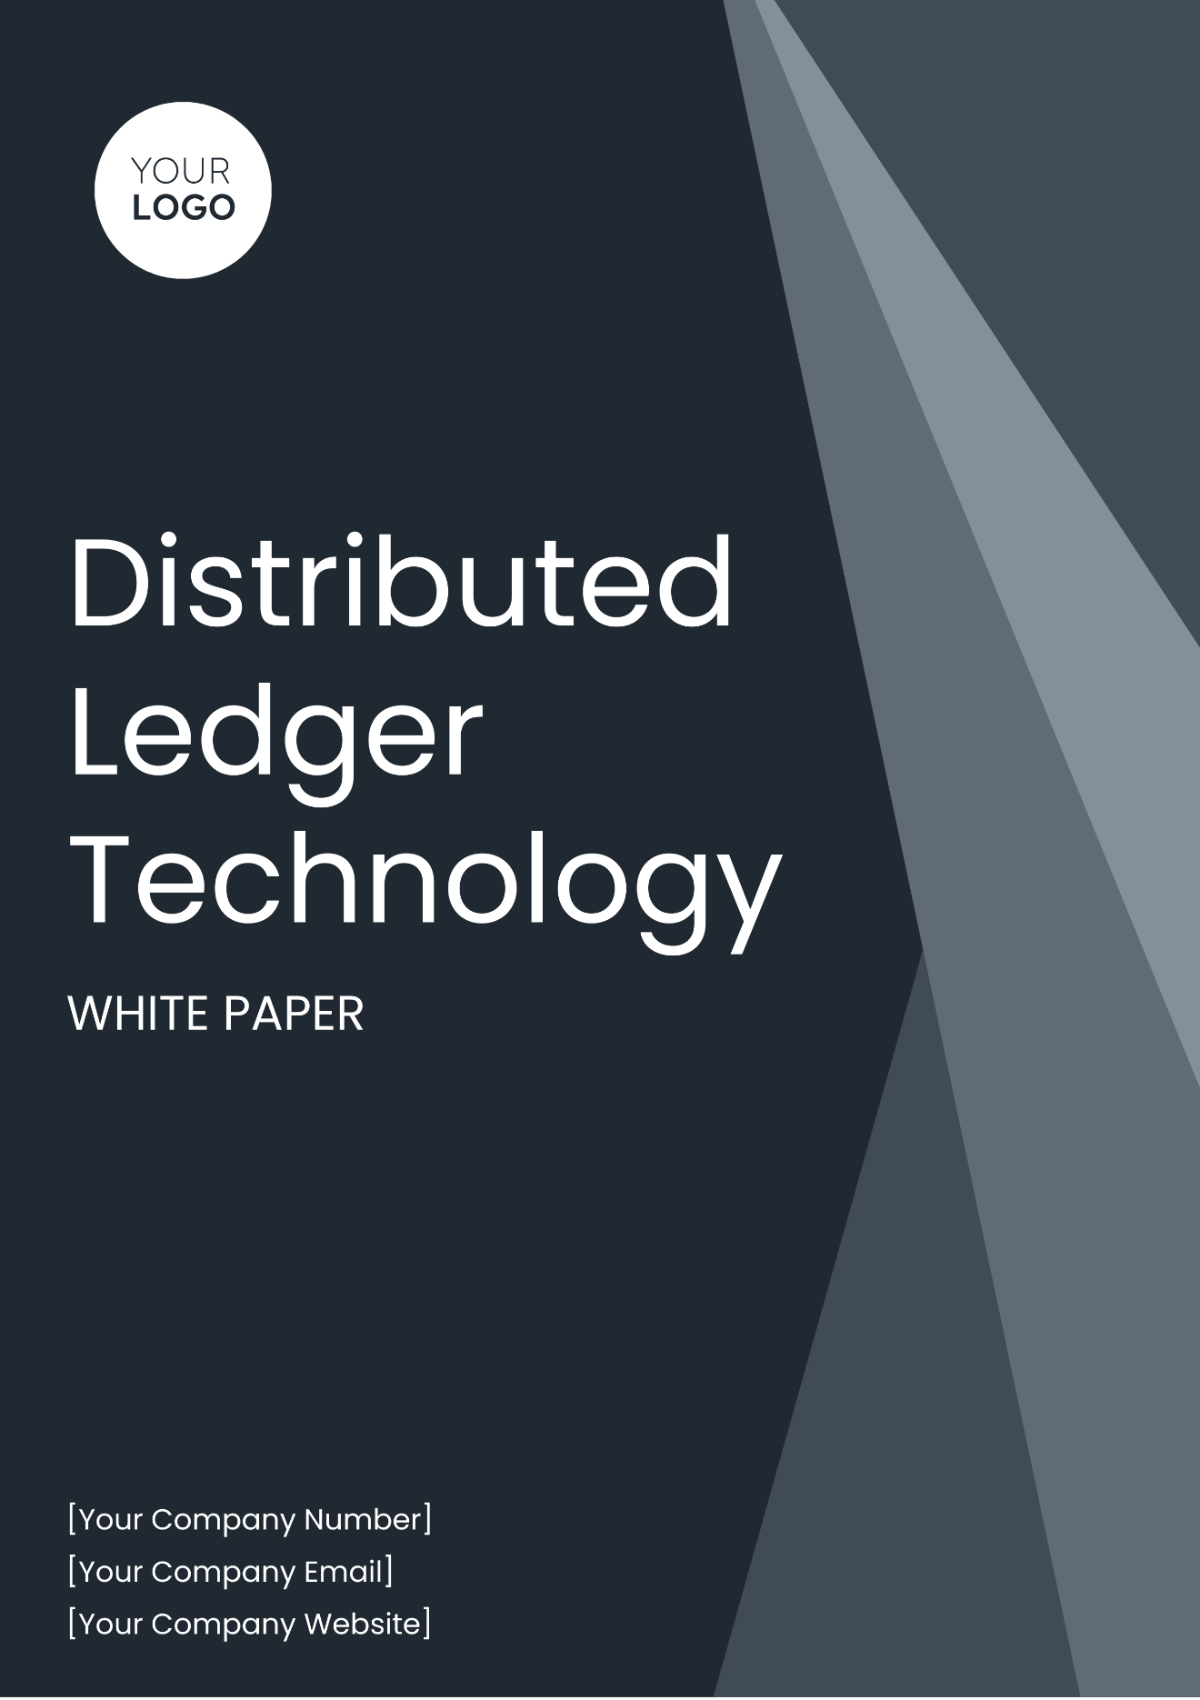 White Paper on Distributed Ledger Technology Template